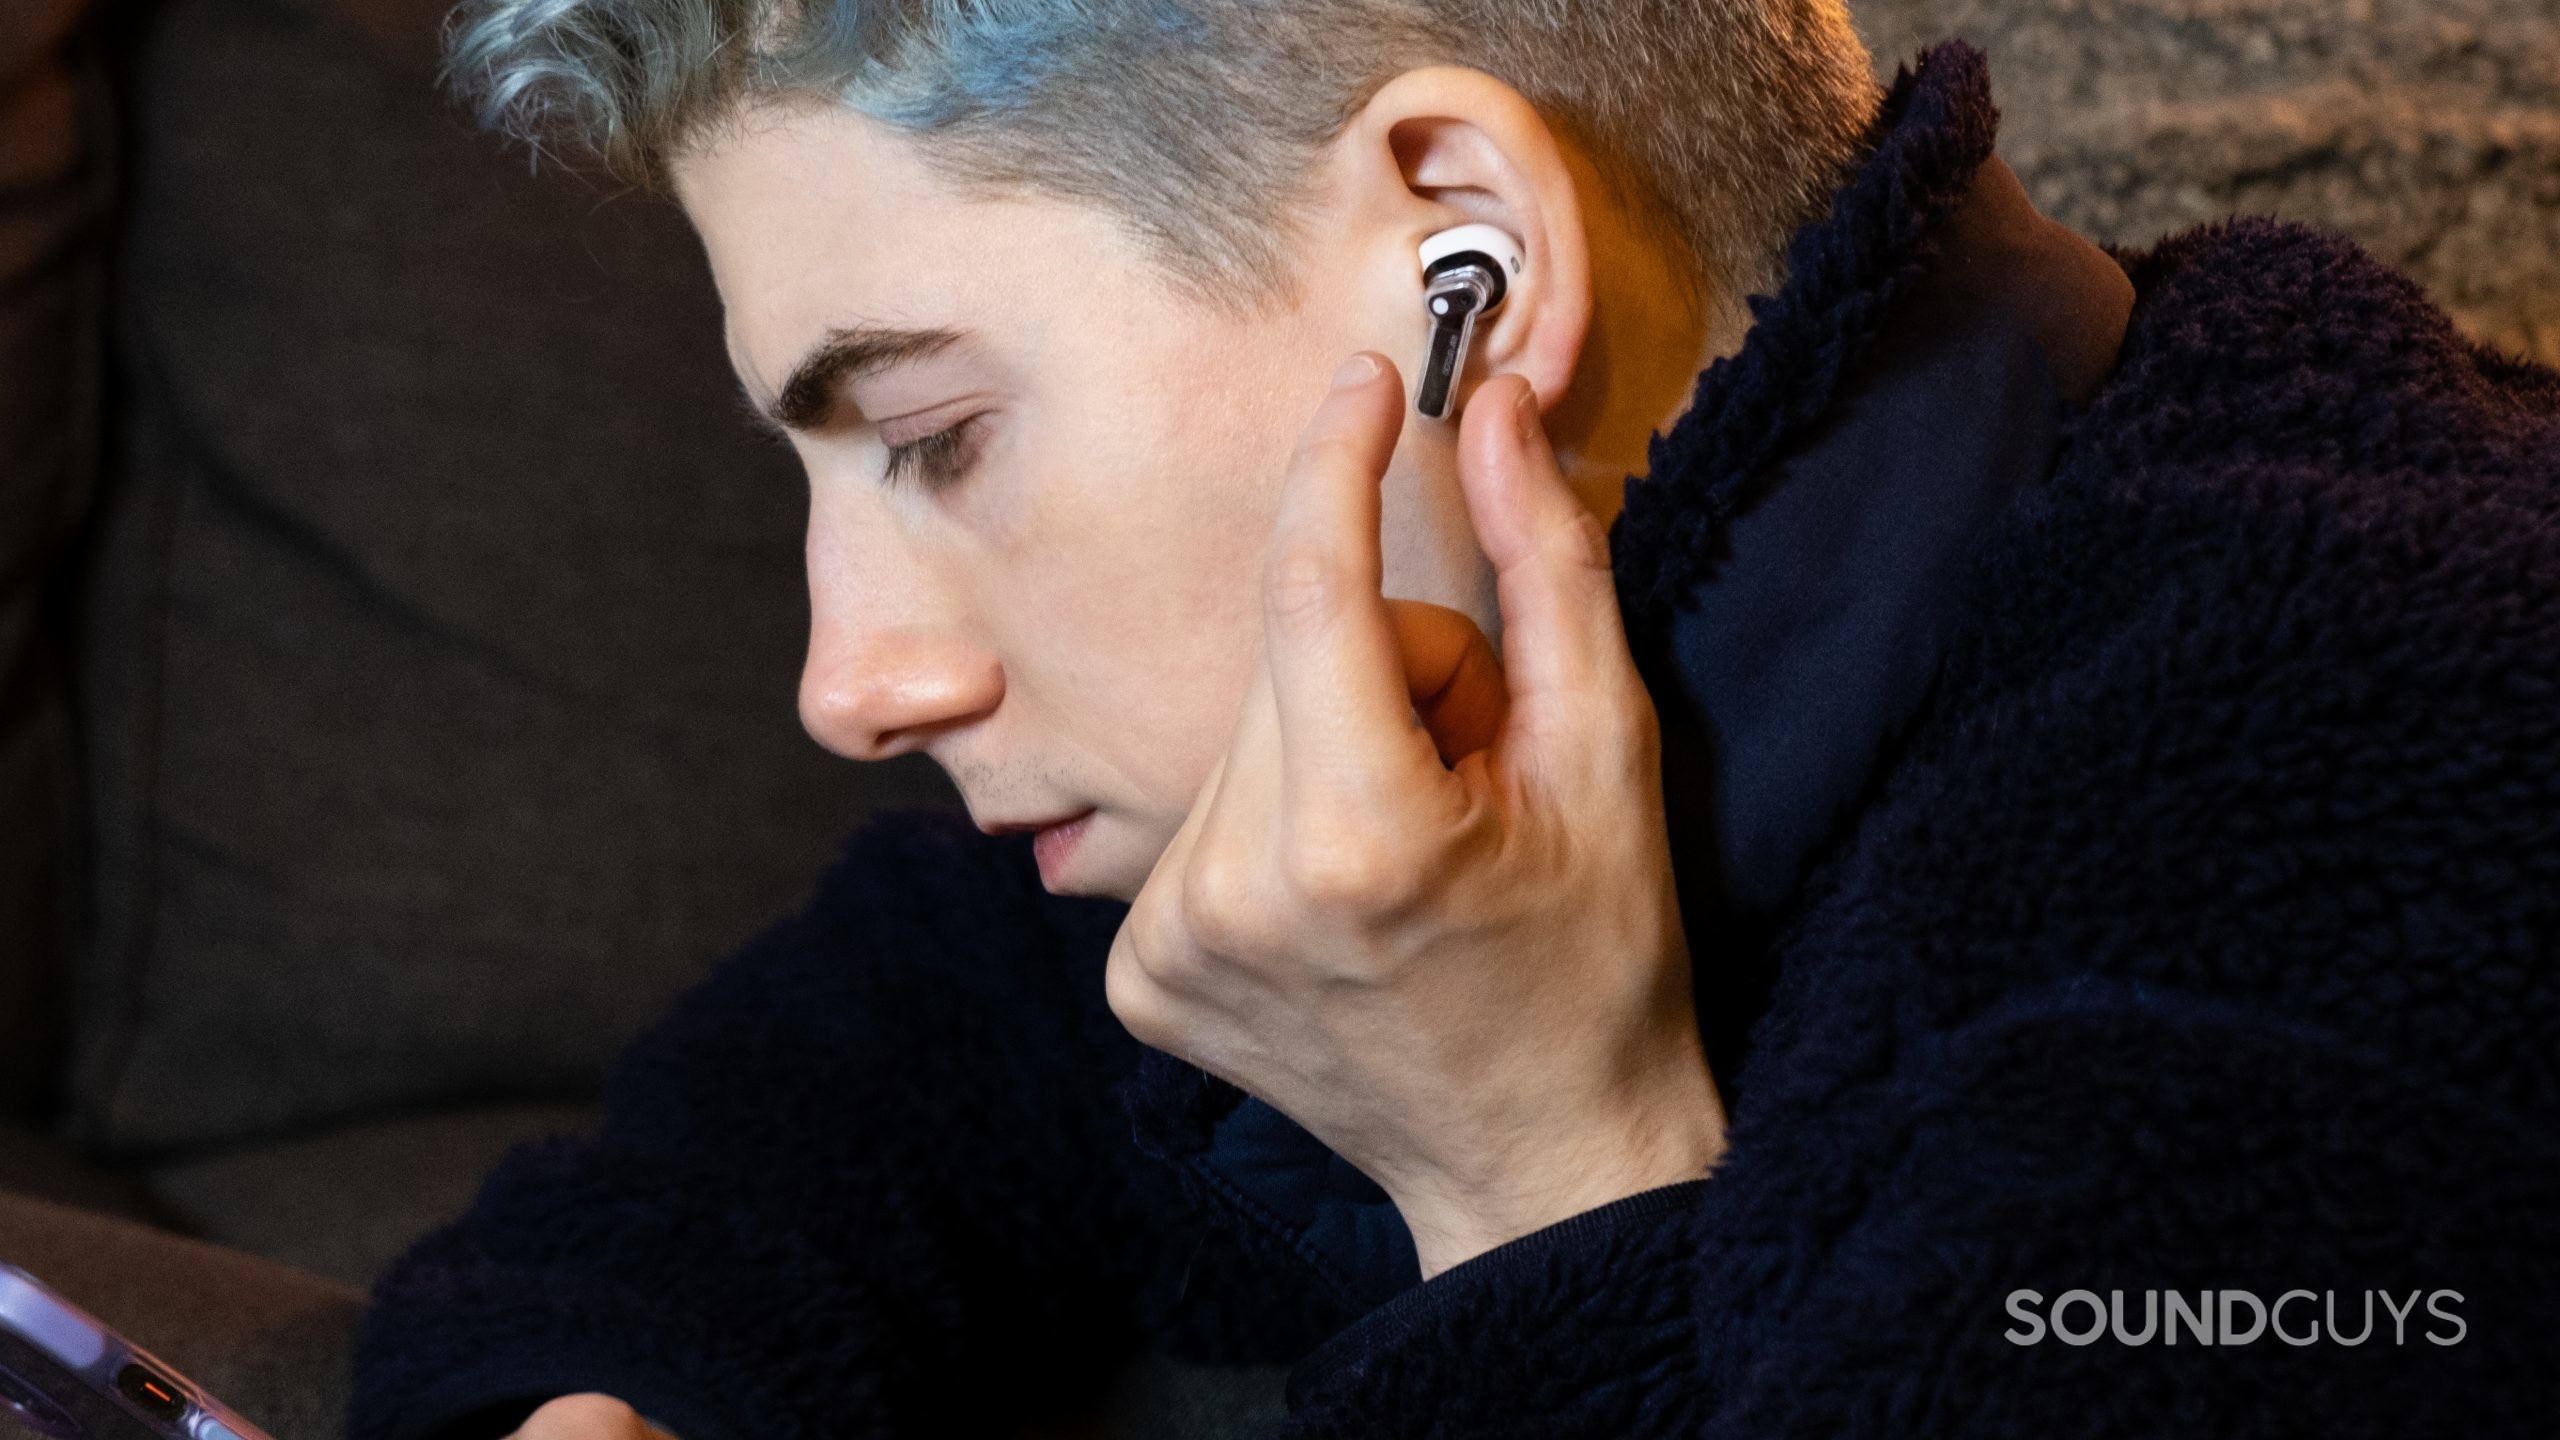 Nothing Ear Stick Review: Is form over functionality a winning